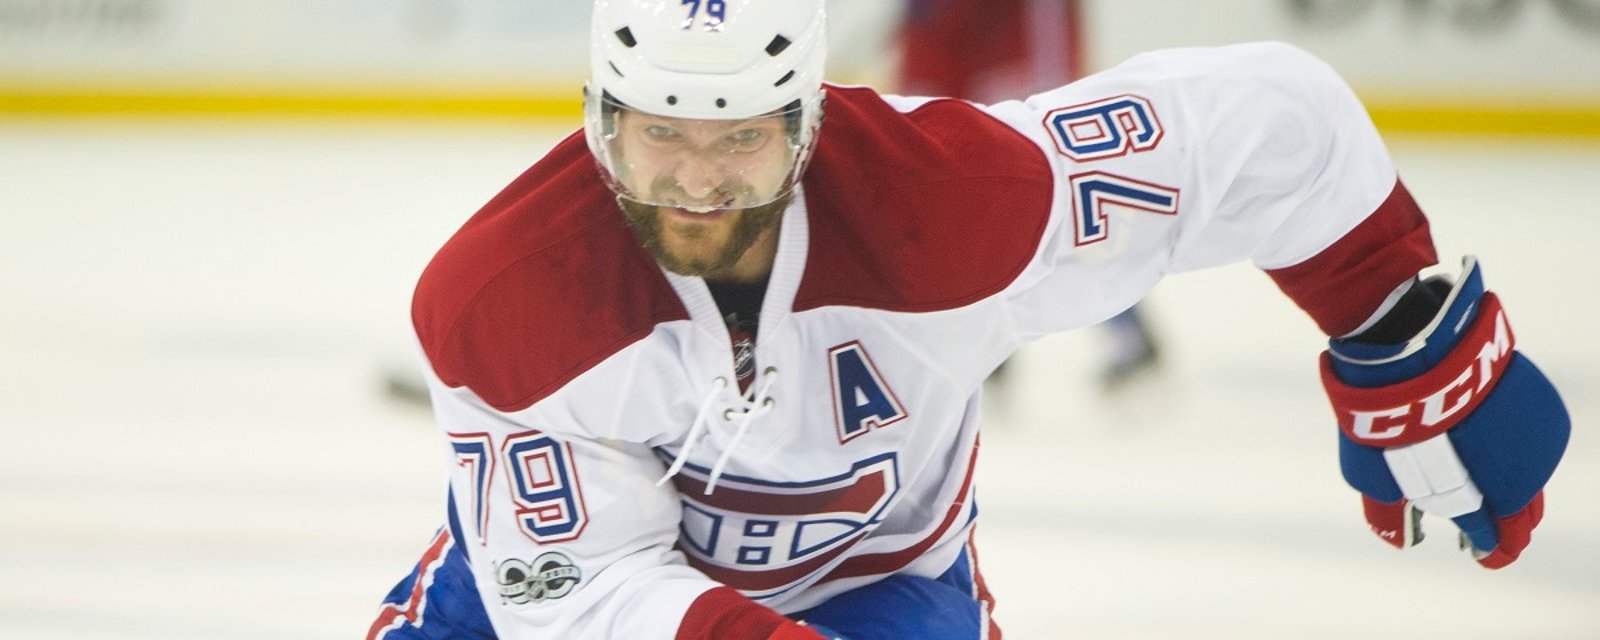 Breaking: Andrei Markov reportedly negotiating with a new NHL team.